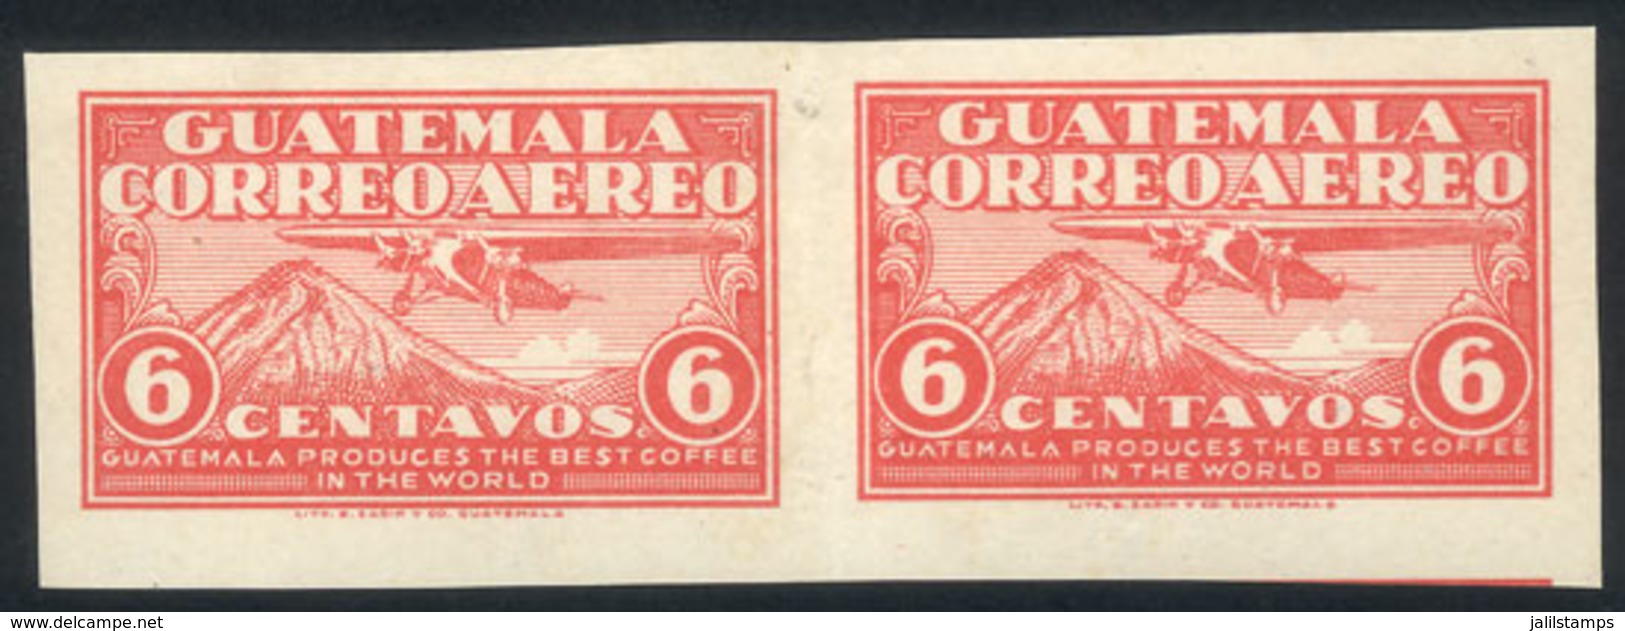 GUATEMALA: Yvert A.6, 1930 Fokker Airplane, IMPERFORATE PAIR (Sc.7b, US$350), Mint Without Gum, VF, Rare! - Guatemala